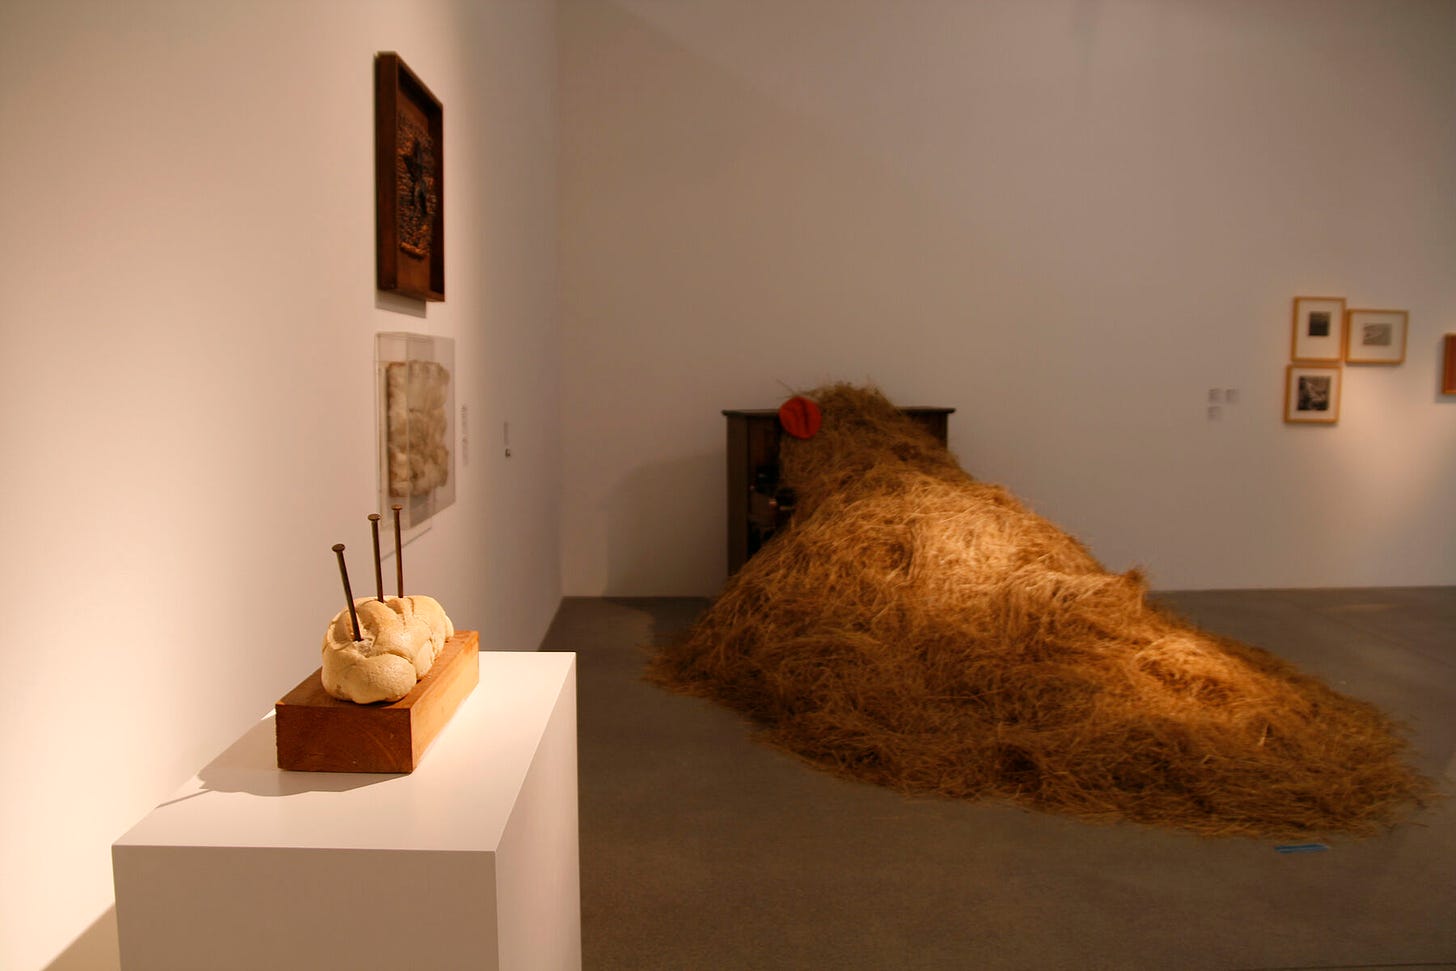 Lit bread installation in a room with framed paintings, next to installation of large haystack spilling out of piano